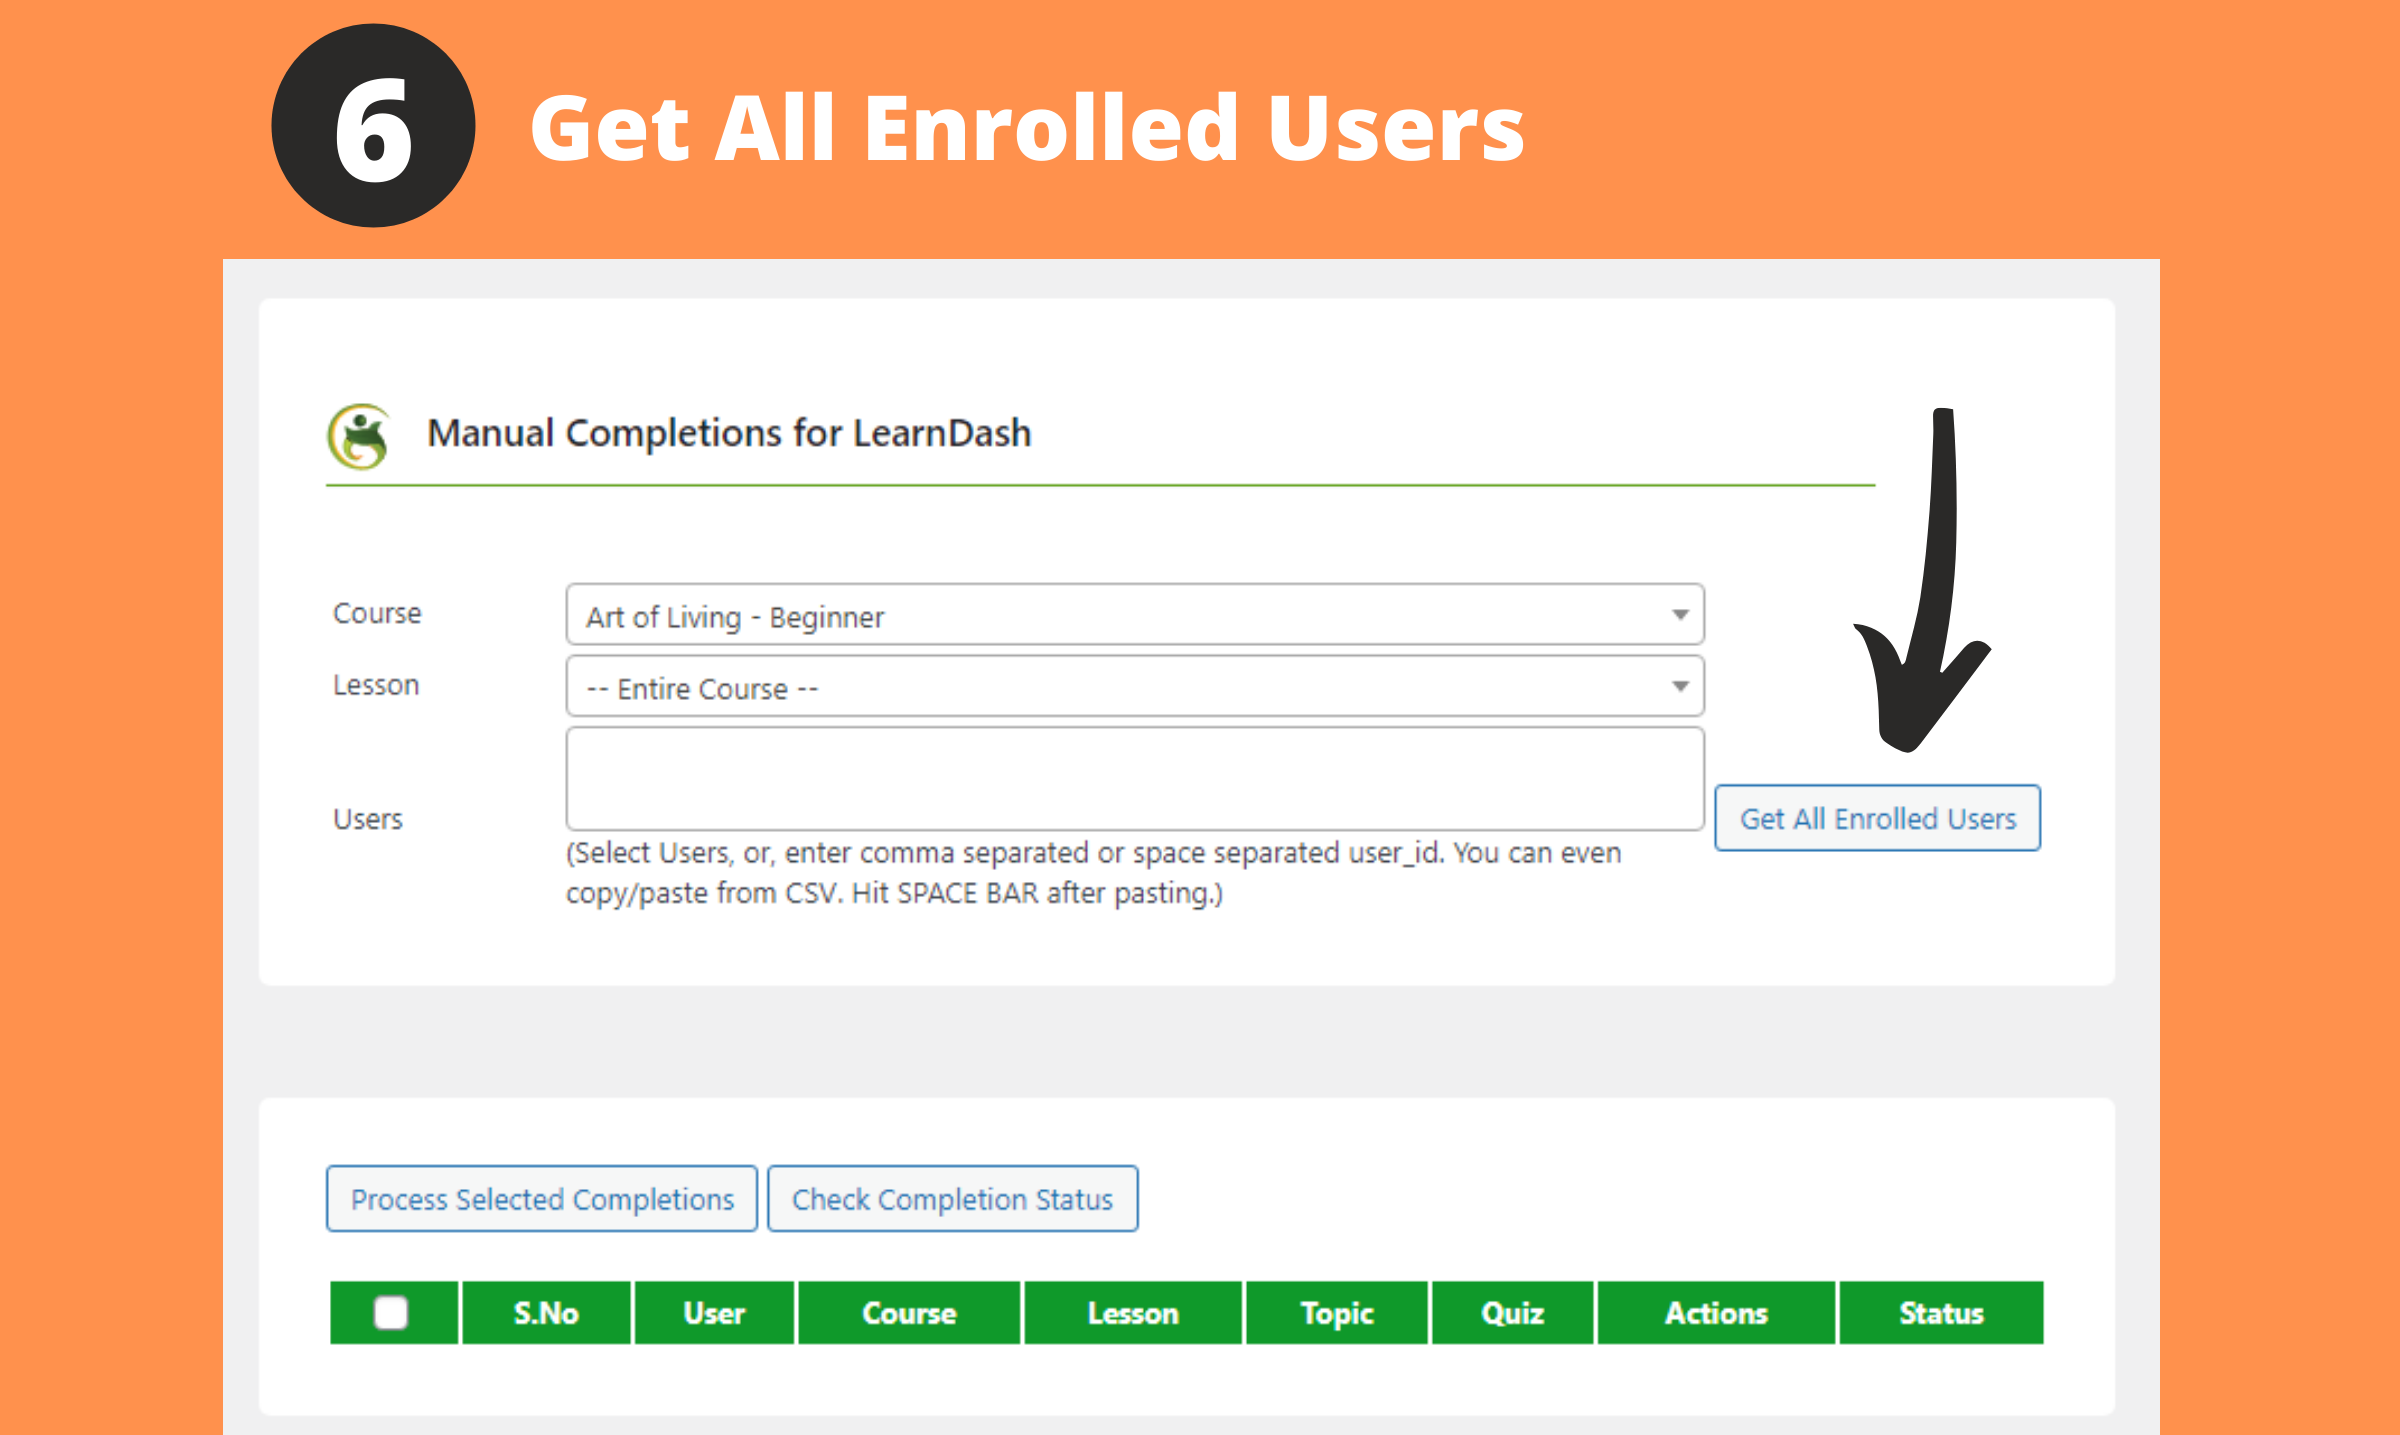 Get all enrolled users